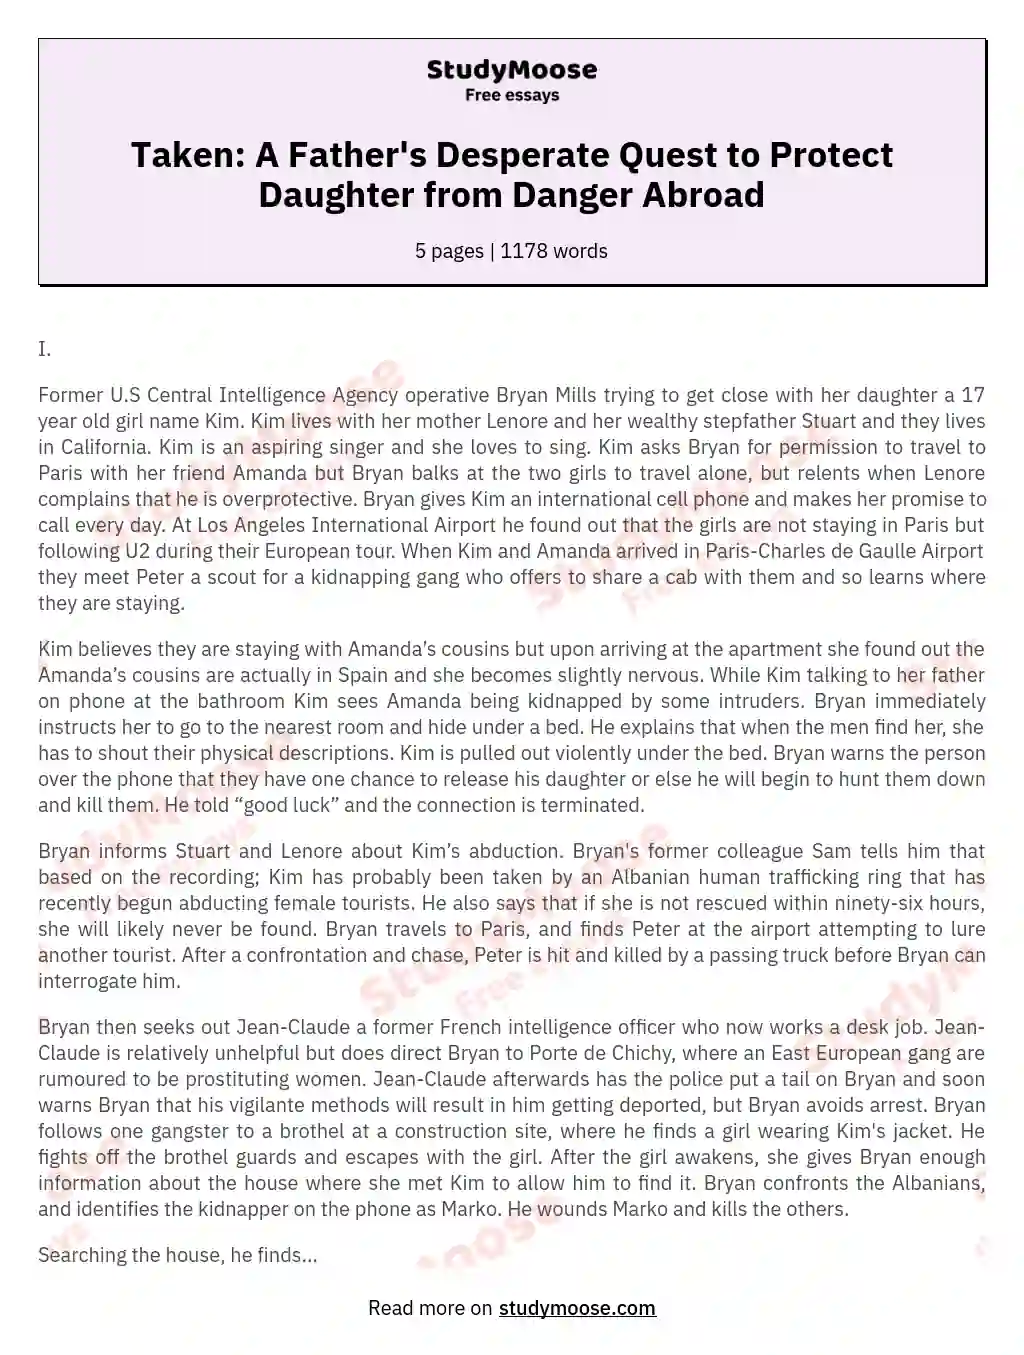 Taken: A Father's Desperate Quest to Protect Daughter from Danger Abroad essay